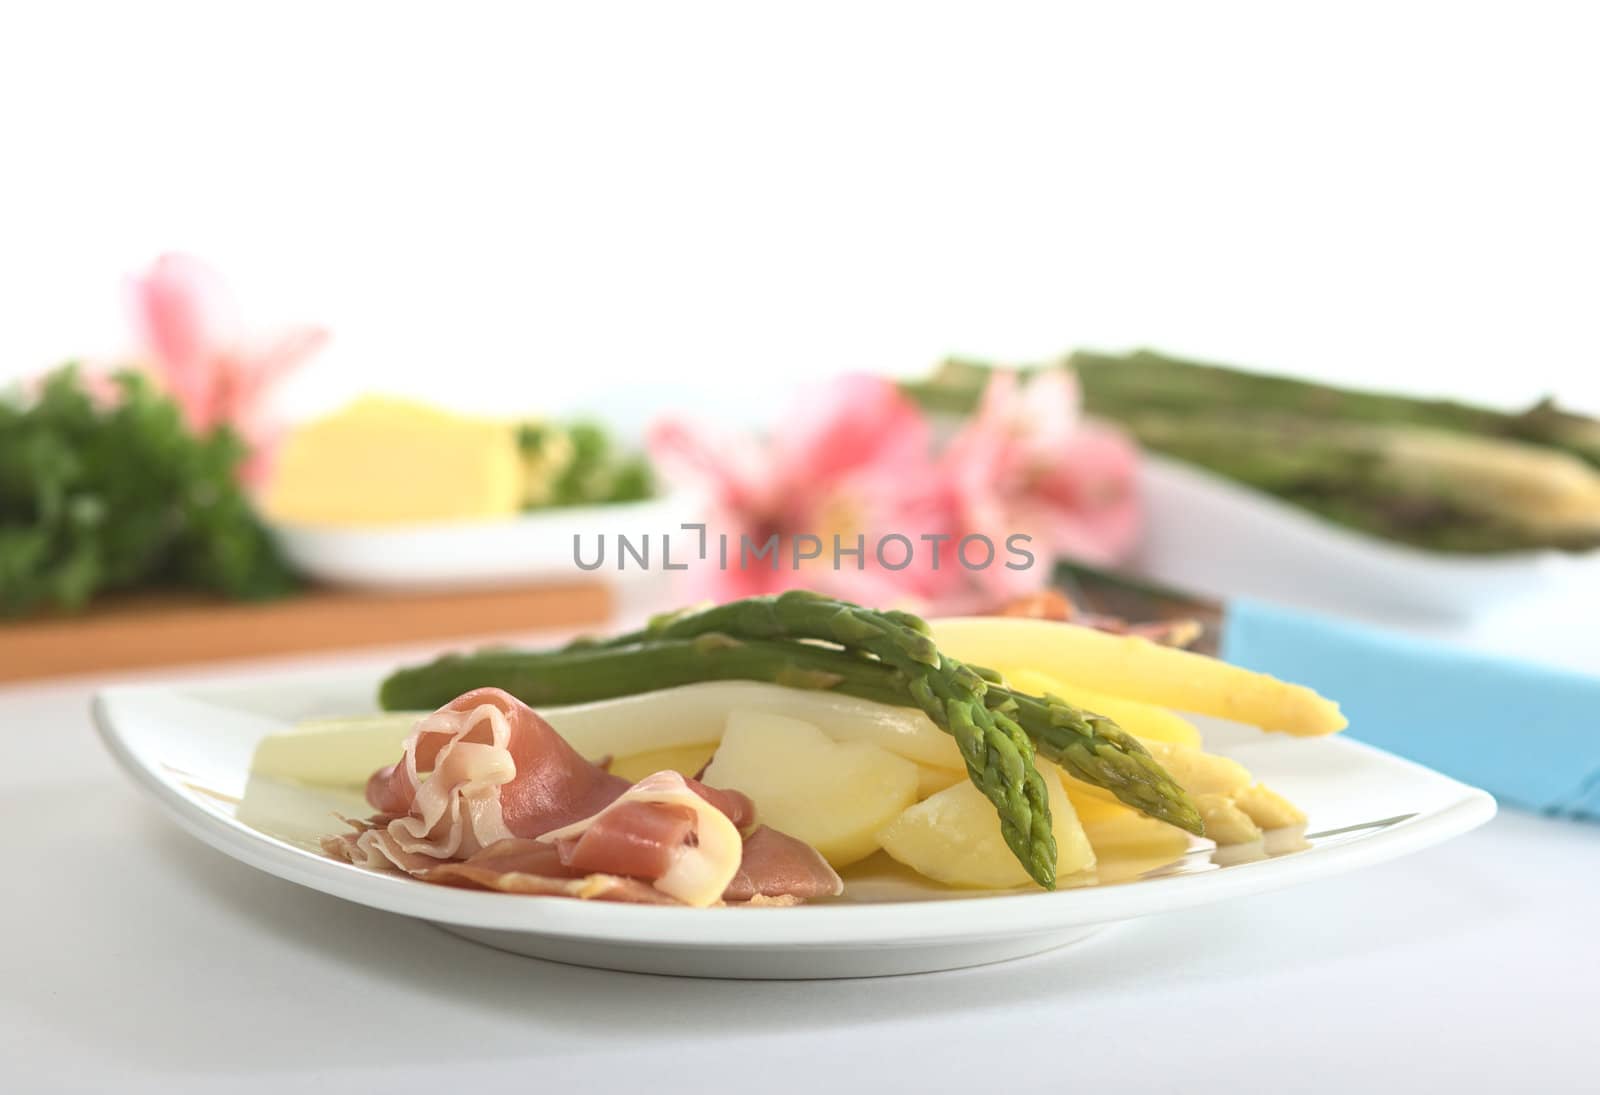 Green and white asparagus on potatoes with ham in the foreground (Very Shallow Depth of Field, Focus on the tip of the asparagus in front)